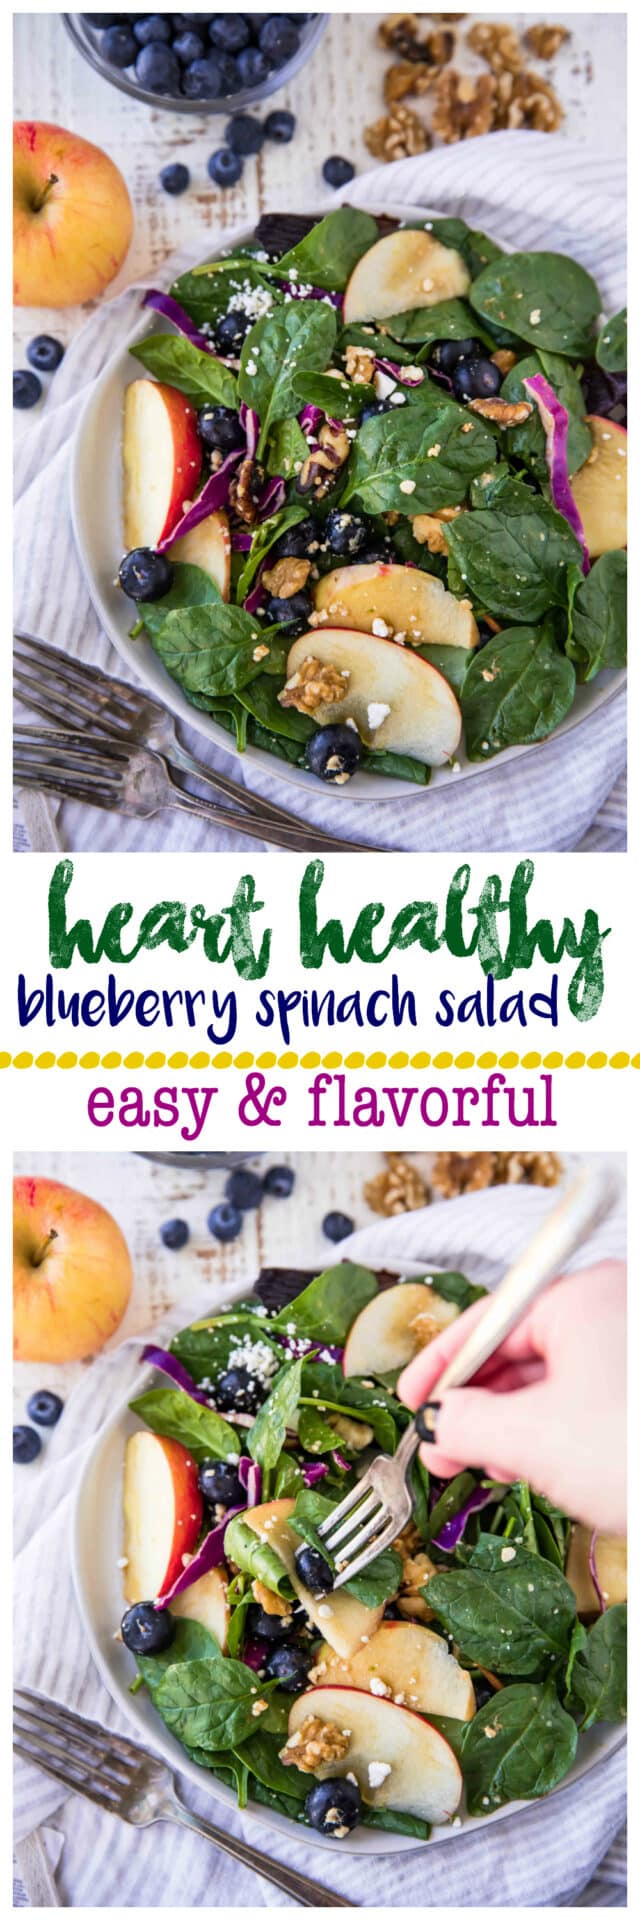 This Heart Healthy Blueberry Spinach Salad is a light and refreshing salad completely loaded with good stuff: sweet apple slices, blueberries, feta cheese, walnuts, fibrous heart healthy spinach and tossed in a flavorful balsamic vinegar.